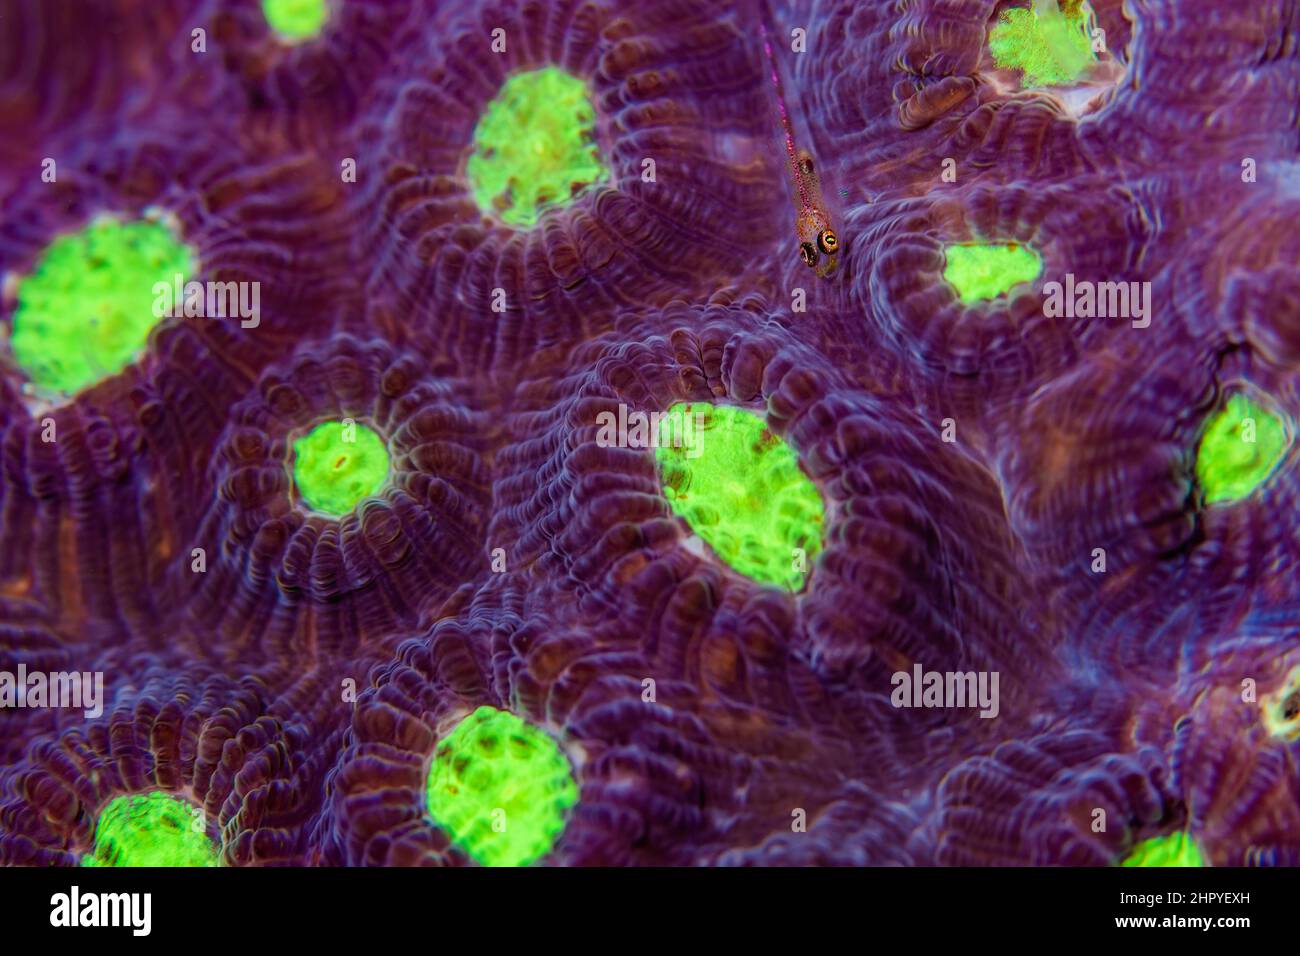 Surface of hard coral with goby fish Stock Photo